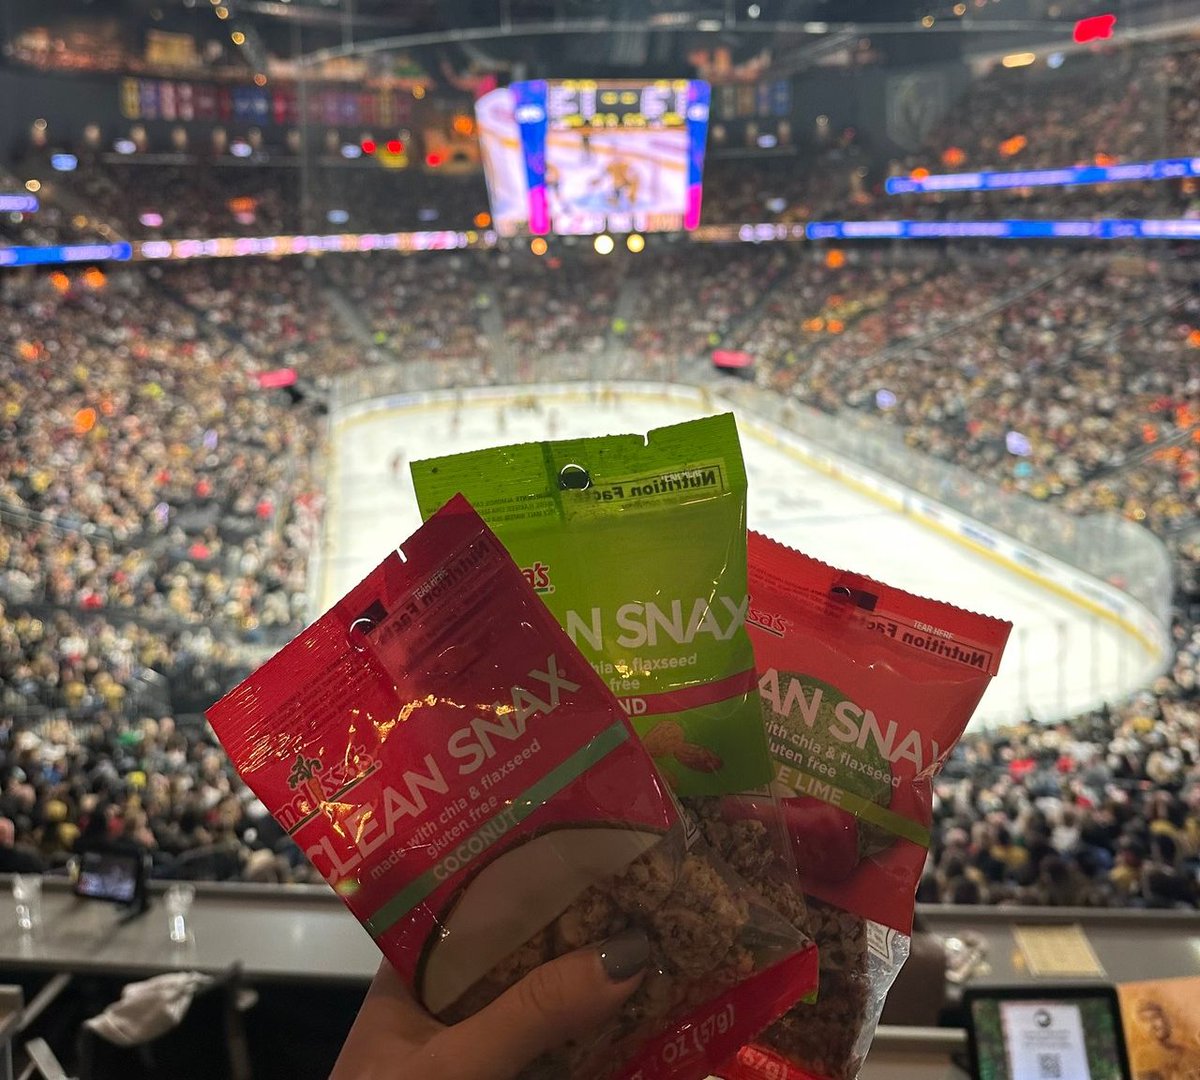 Game 4 at @TMobileArena! 🏒🤩 Can the @goldenknights take a 3-1 lead over the @dallasstars tonight!? #MelissasProduce #HealthyOptions #CleanSnax #UKnightTheRealm #VegasBorn #StanleyCup